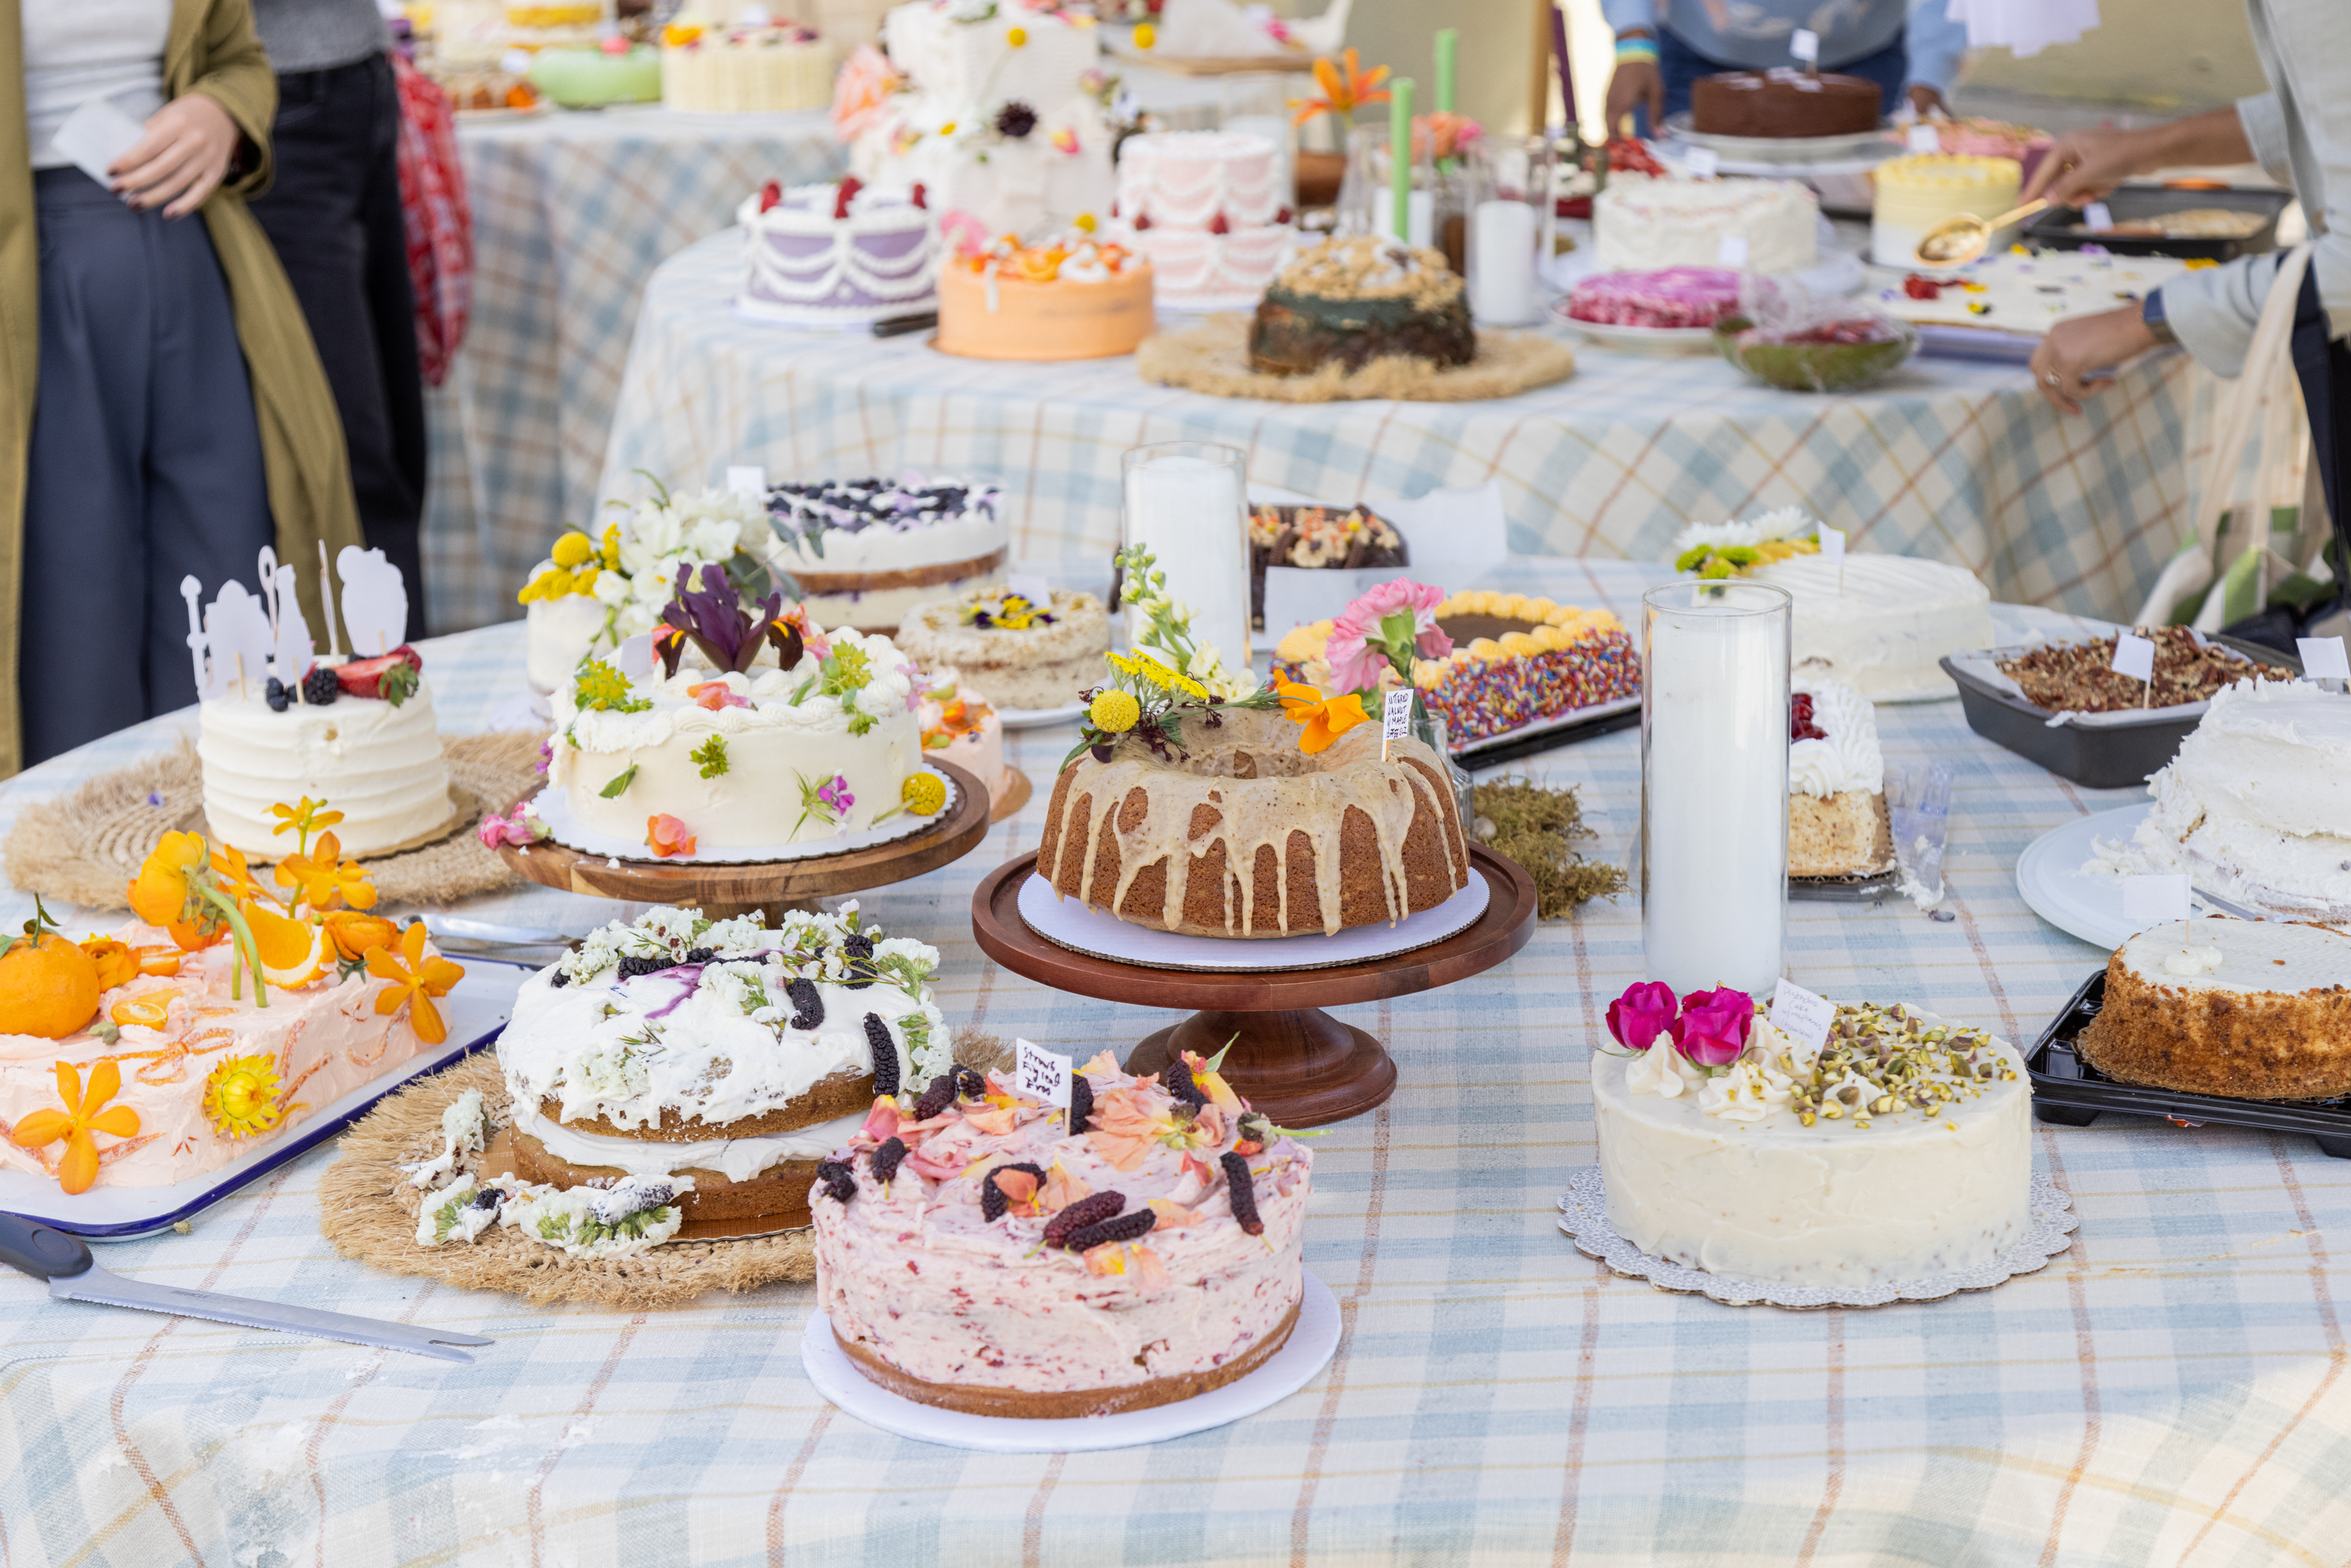 A table filled with various decorated cakes, some topped with flowers, displayed outdoors.